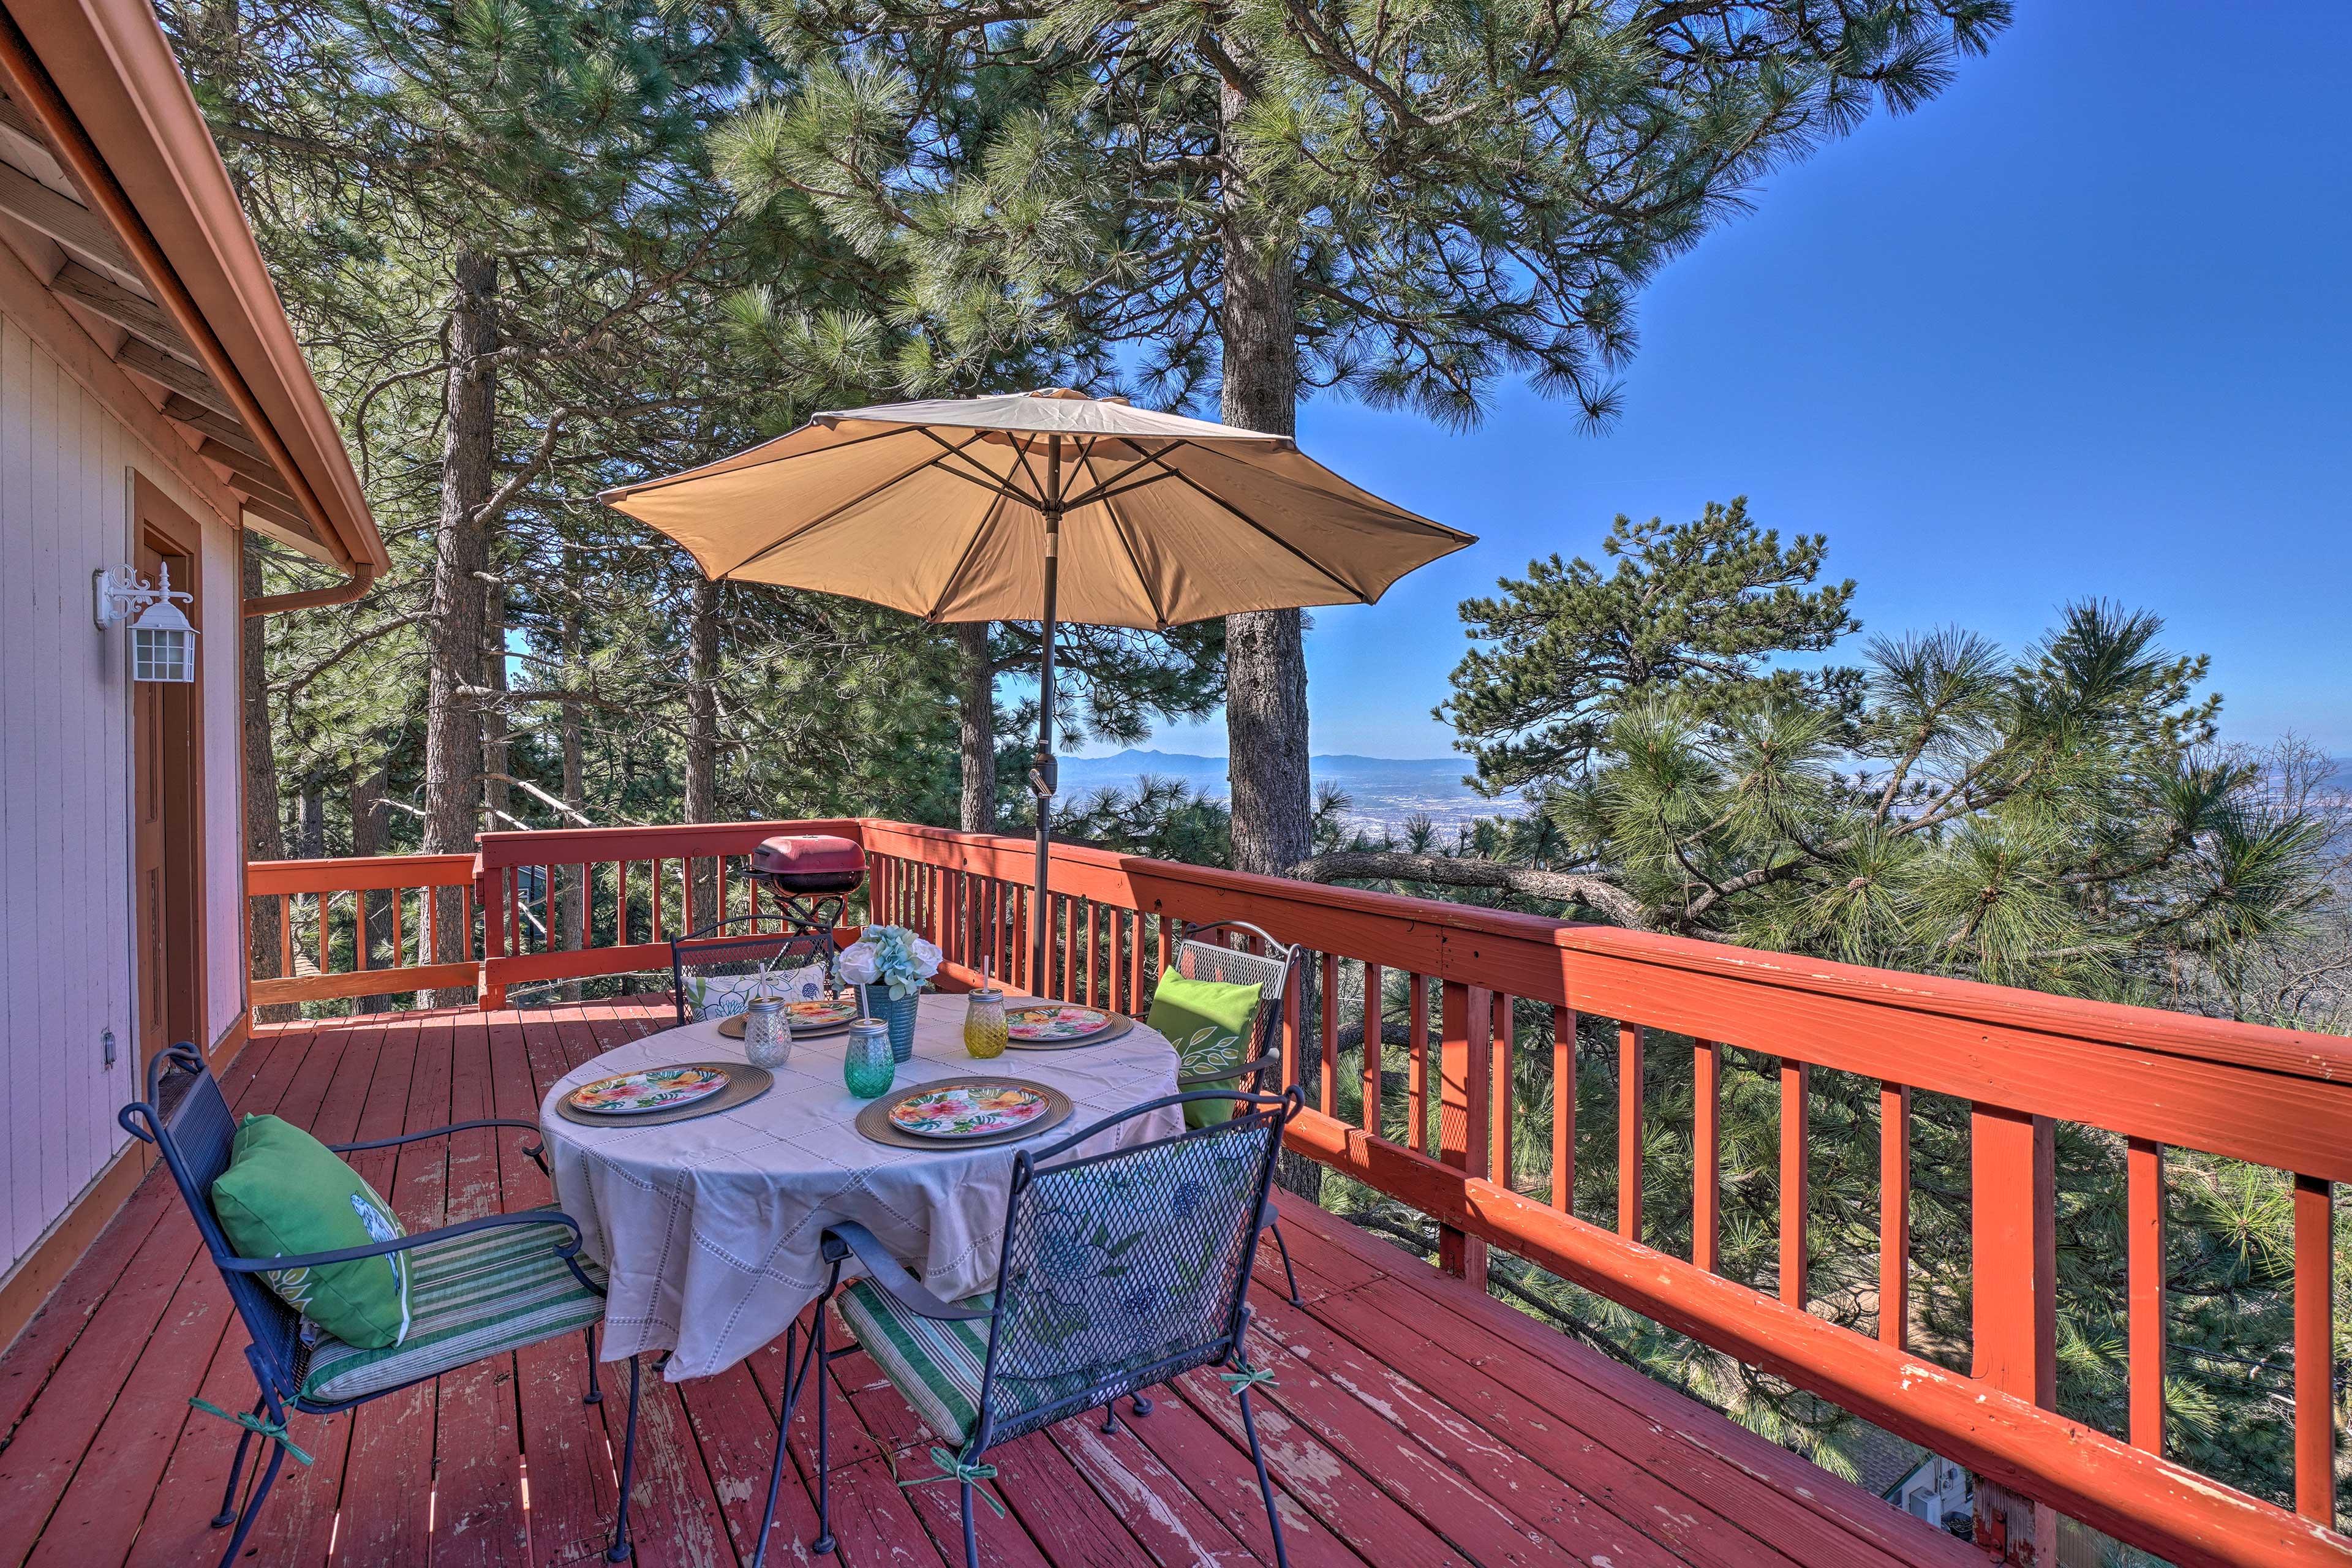 Entertain everyone with the spacious, furnishing deck.